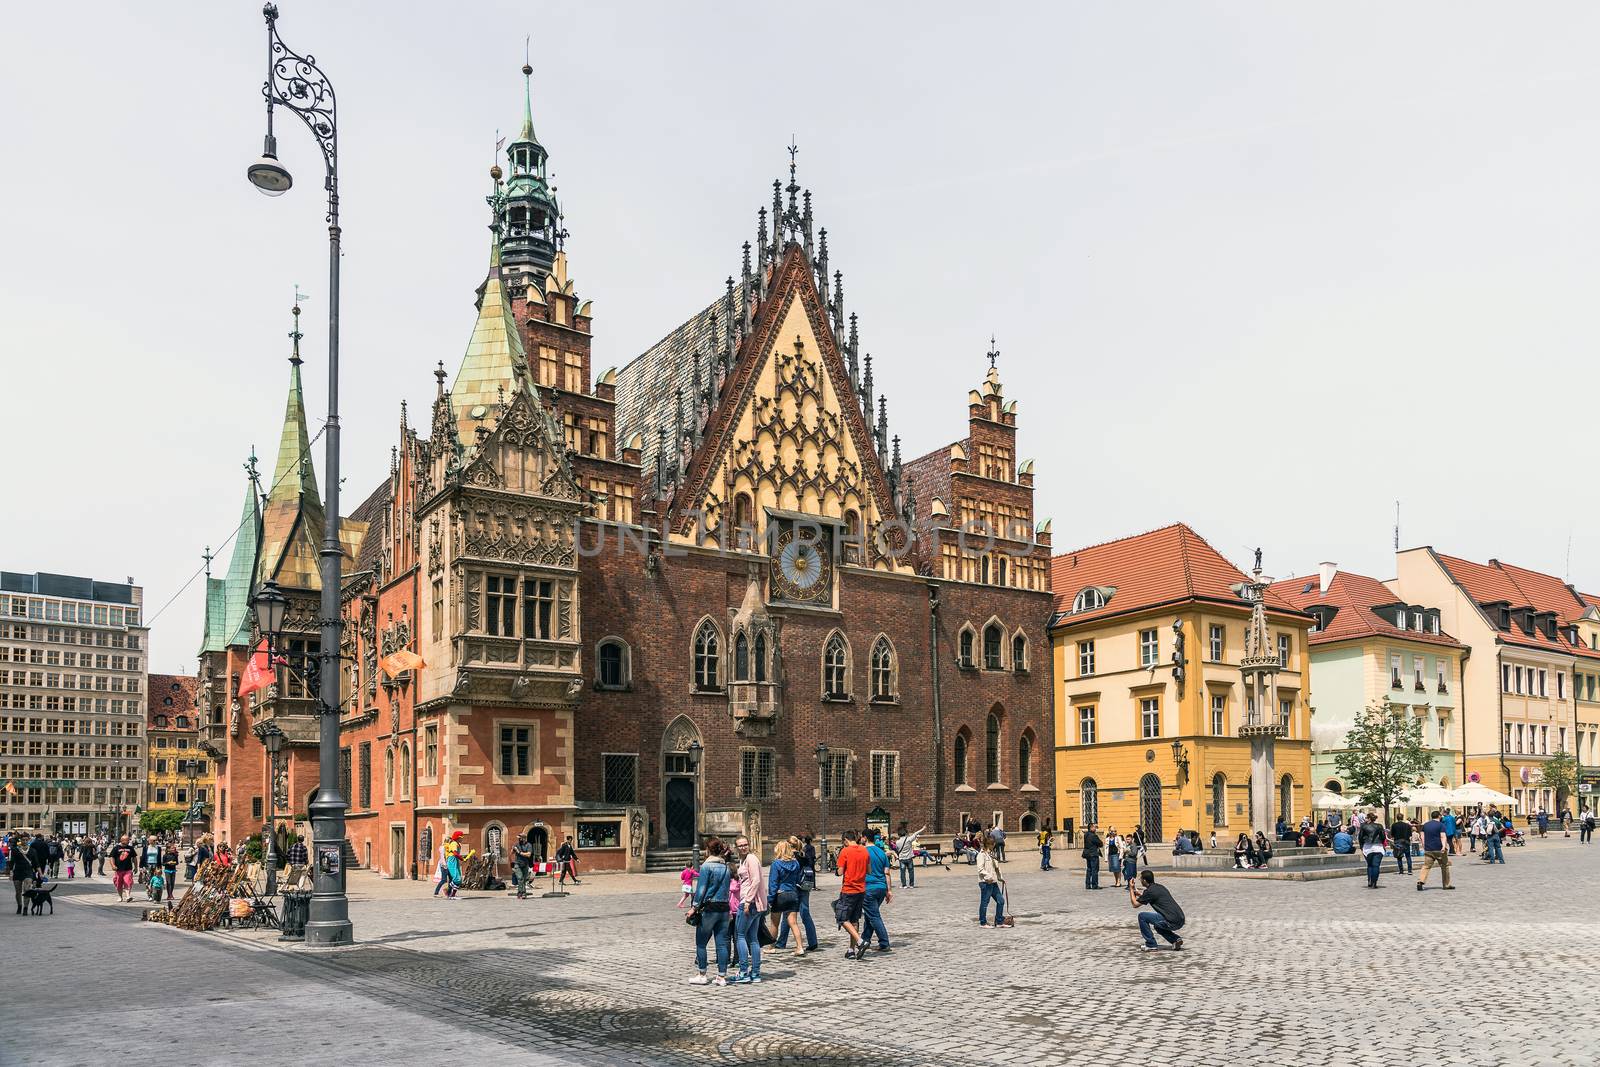 The Old Town Hall of Wrocław in the Market Square. The Gothic building was developed between the 13th and 16th centuries nowadays remains the main city’s landmark.